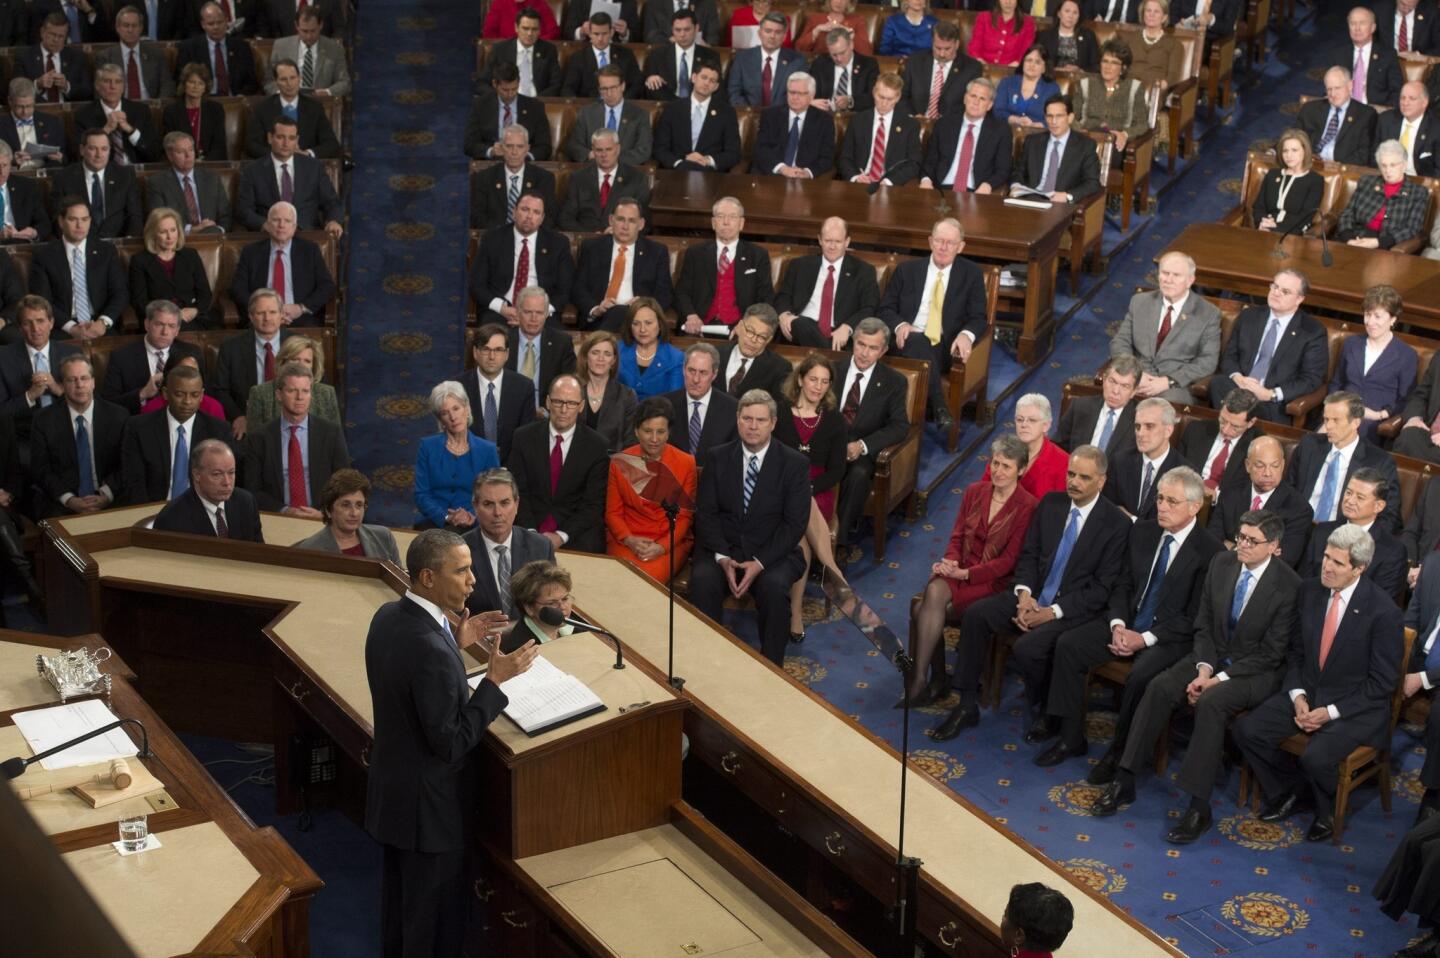 President Obama's State of the Union address